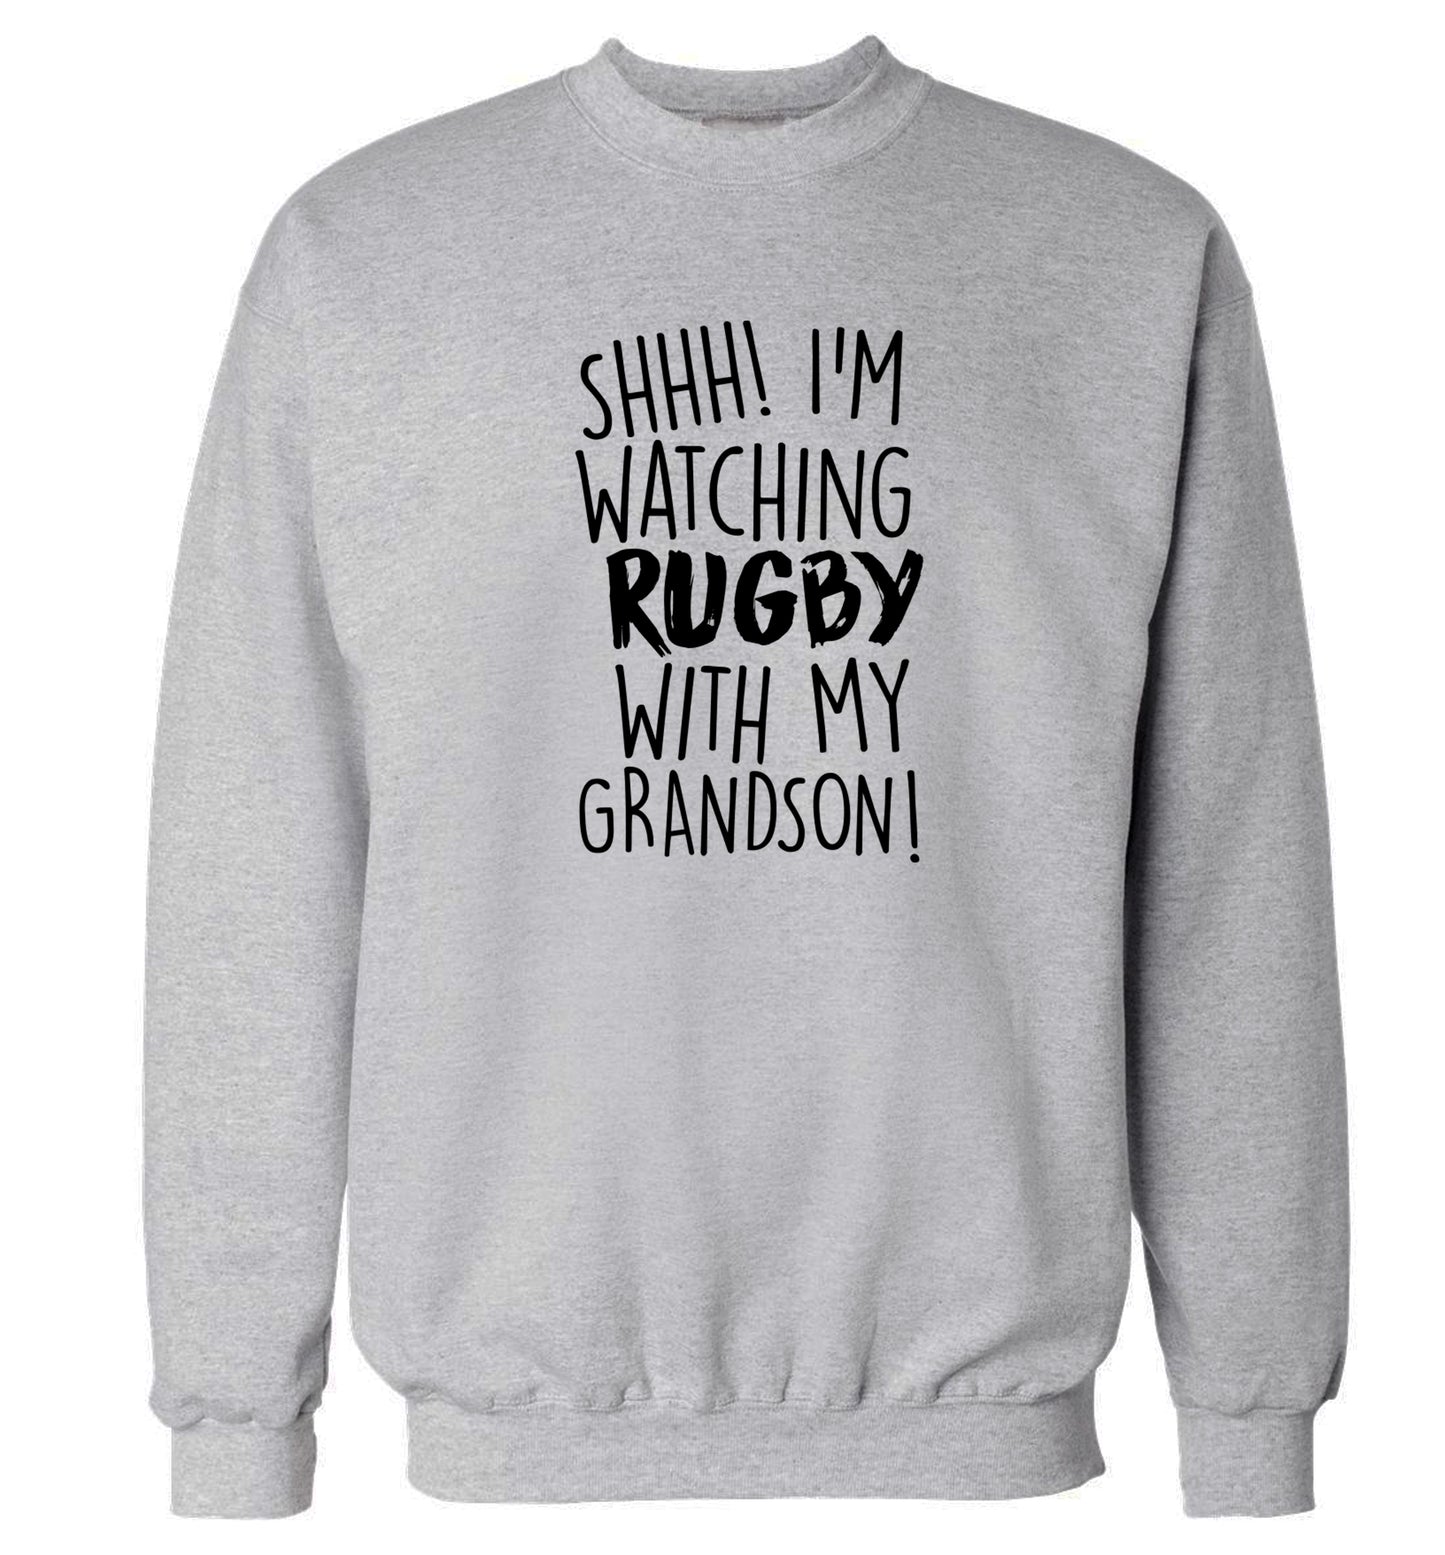 Shh I'm watching rugby with my grandson Adult's unisex grey Sweater 2XL